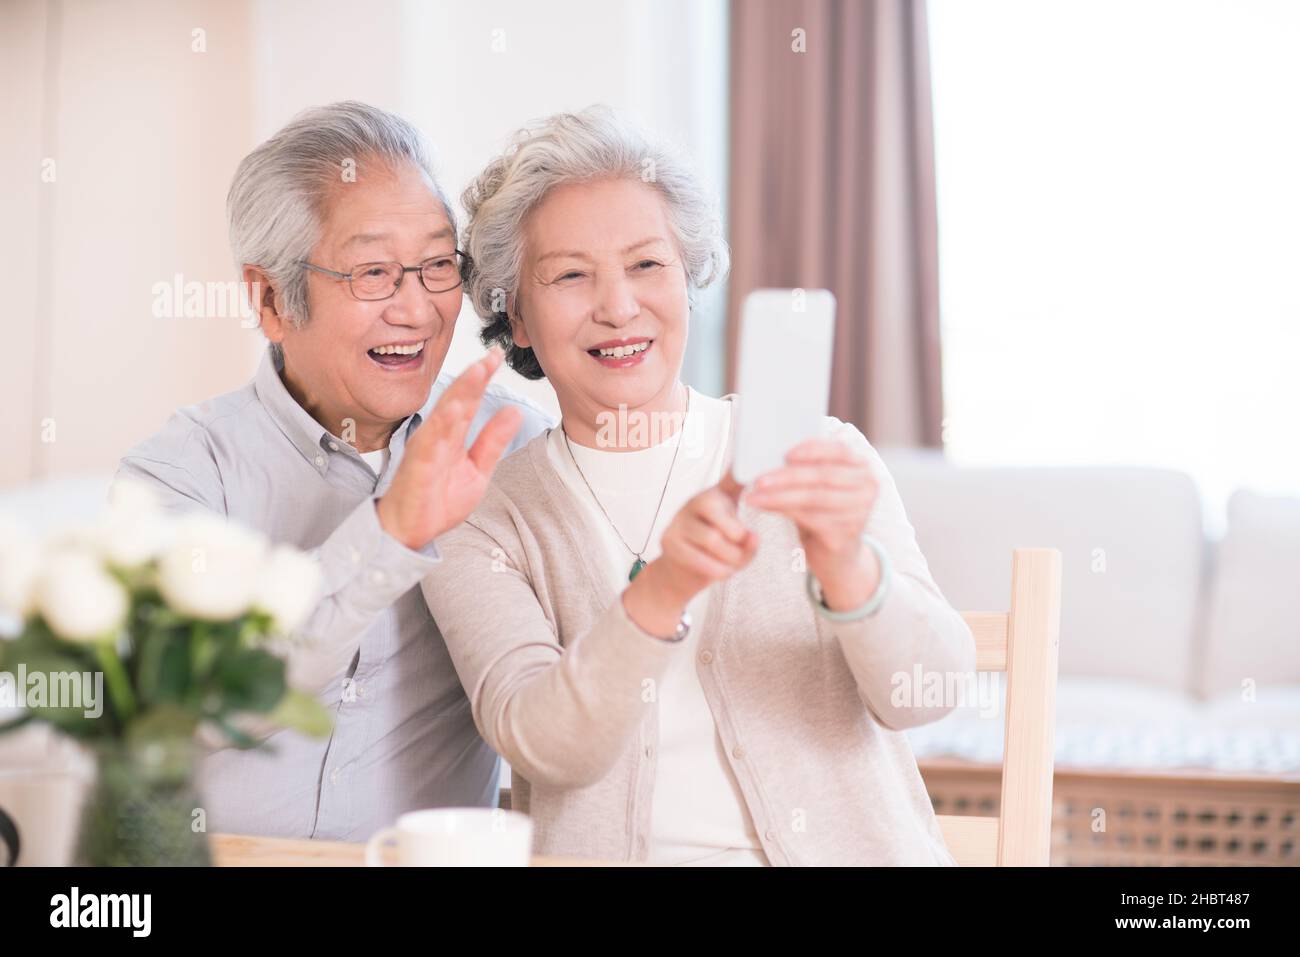 Elderly couple using a mobile phone to take selfies at home Stock Photo